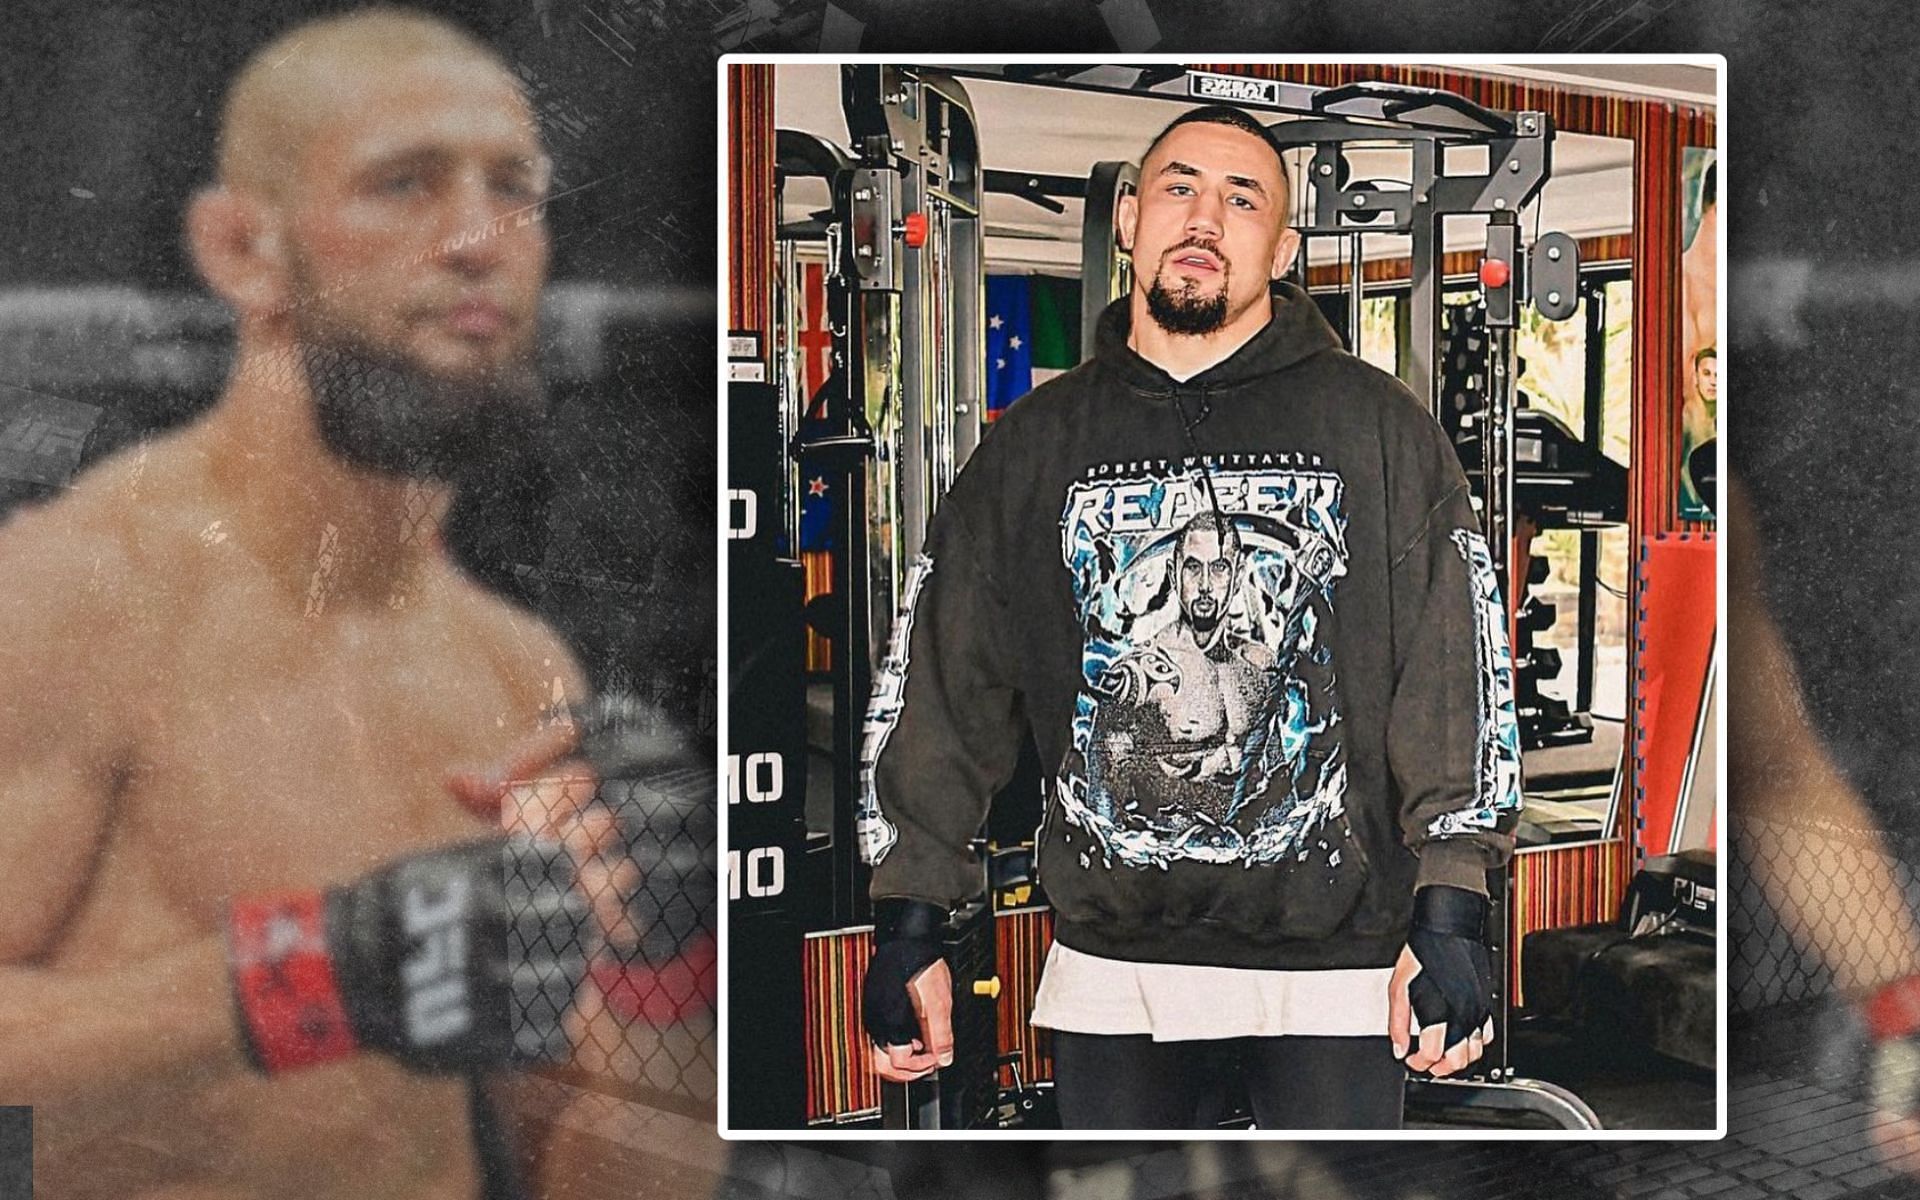 Robert Whittaker (right) shares his reaction to headliner matchup with Khamzat Chimaev for UFC Arabia. [Image courtesy: @khamzat_chimaev &amp; @obwhittakermma on Instagram]